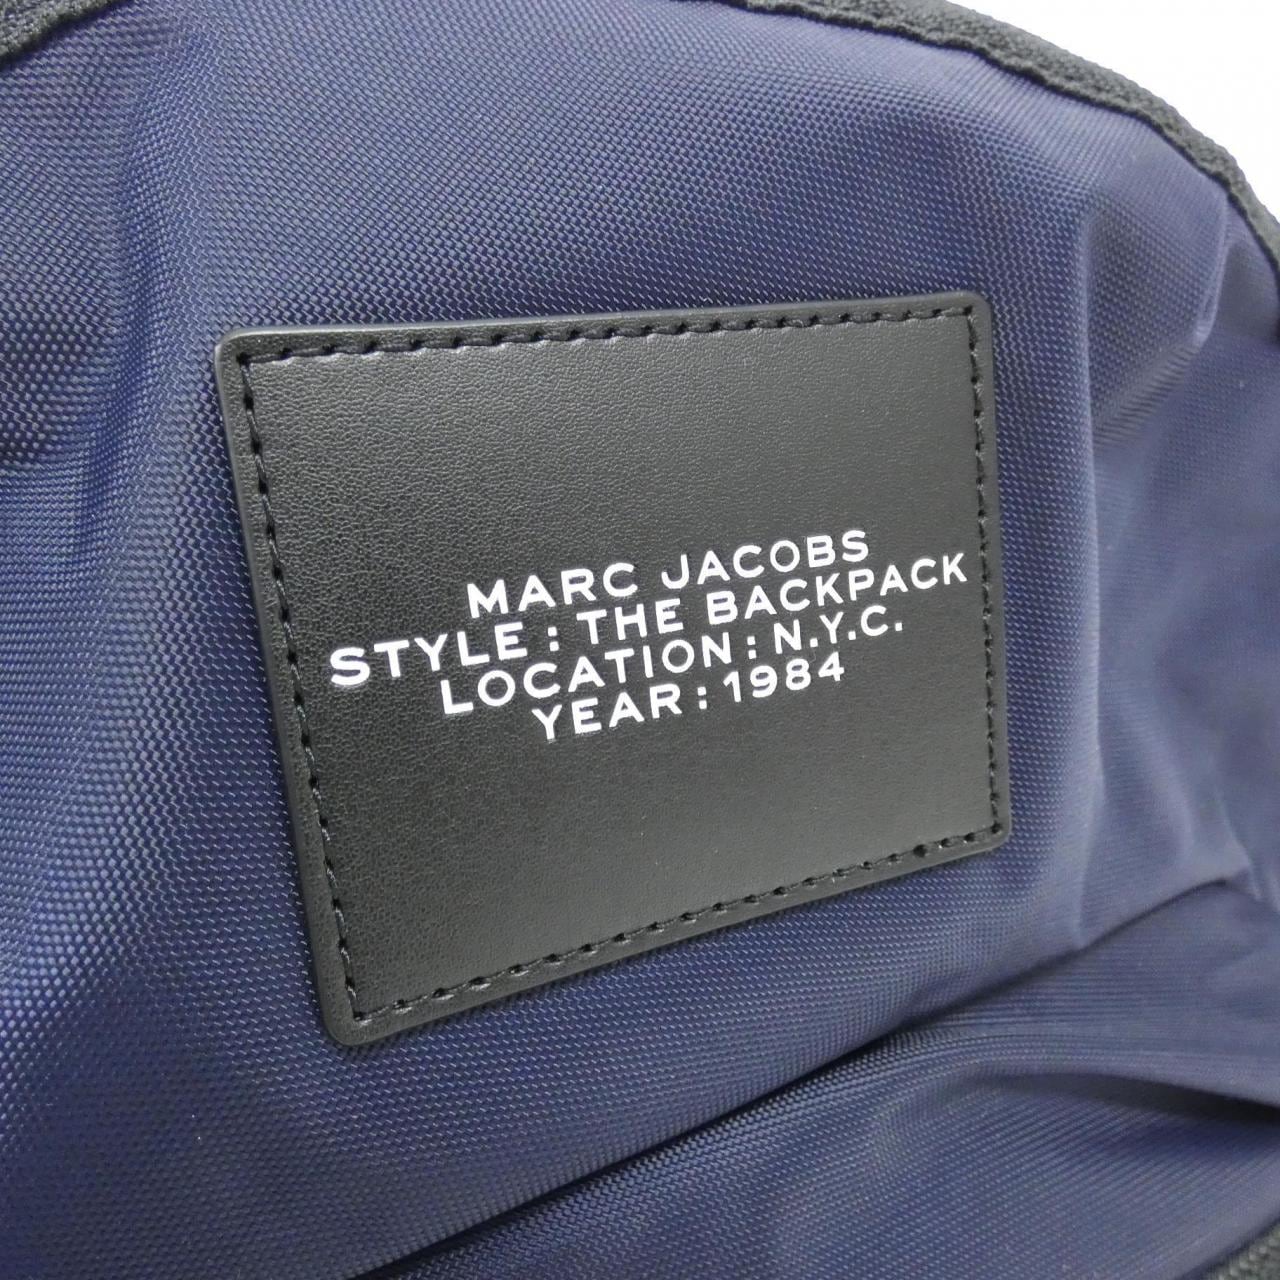 [BRAND NEW] MARC JACOBS 2F3HBP028H02 Backpack